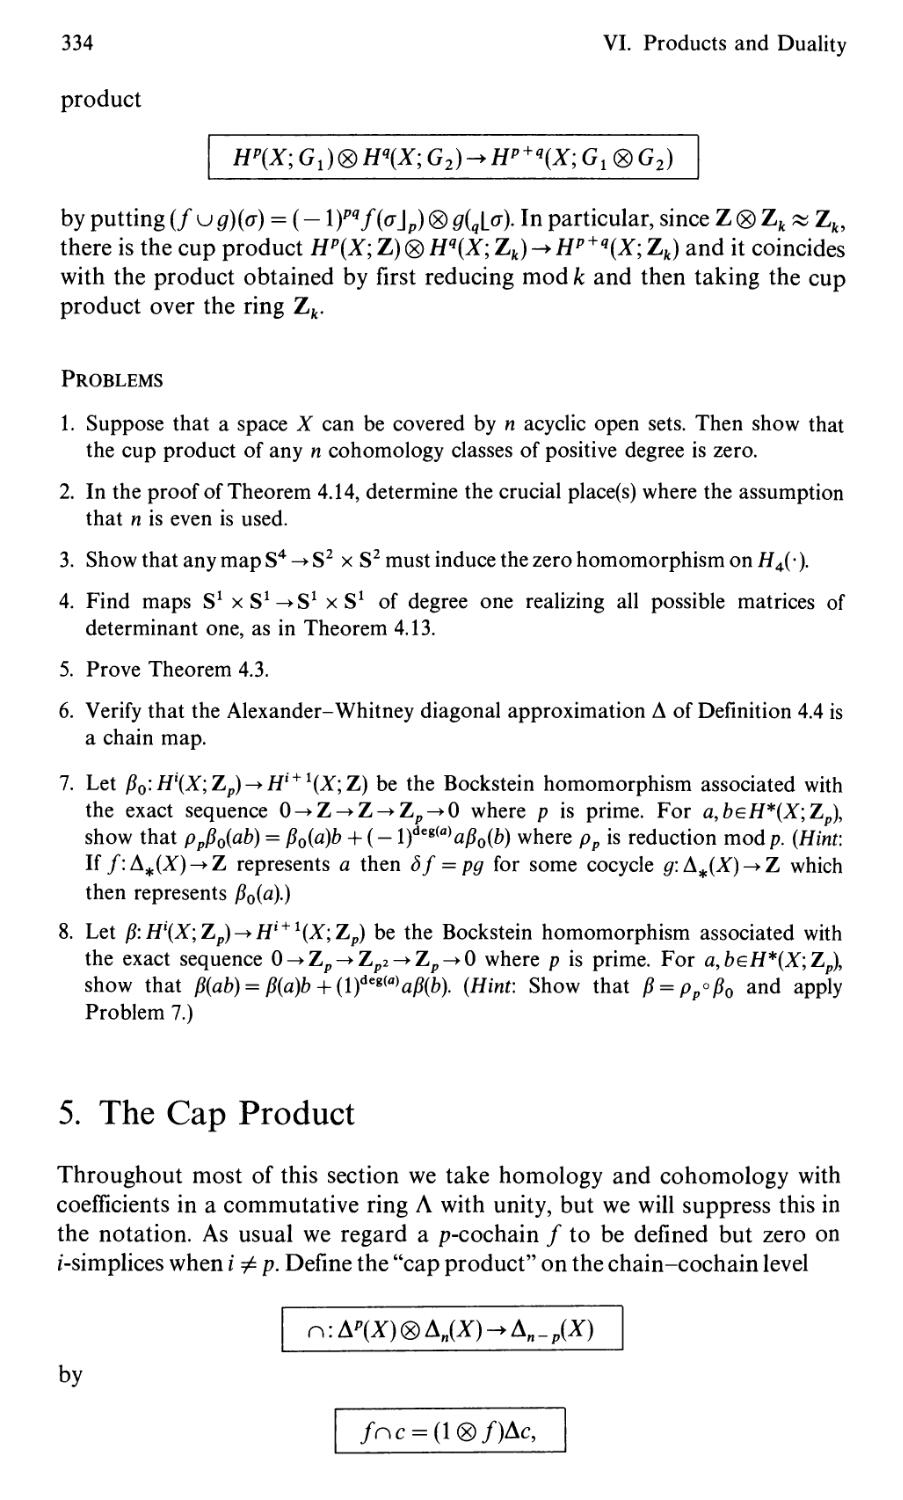 5. The Cap Product